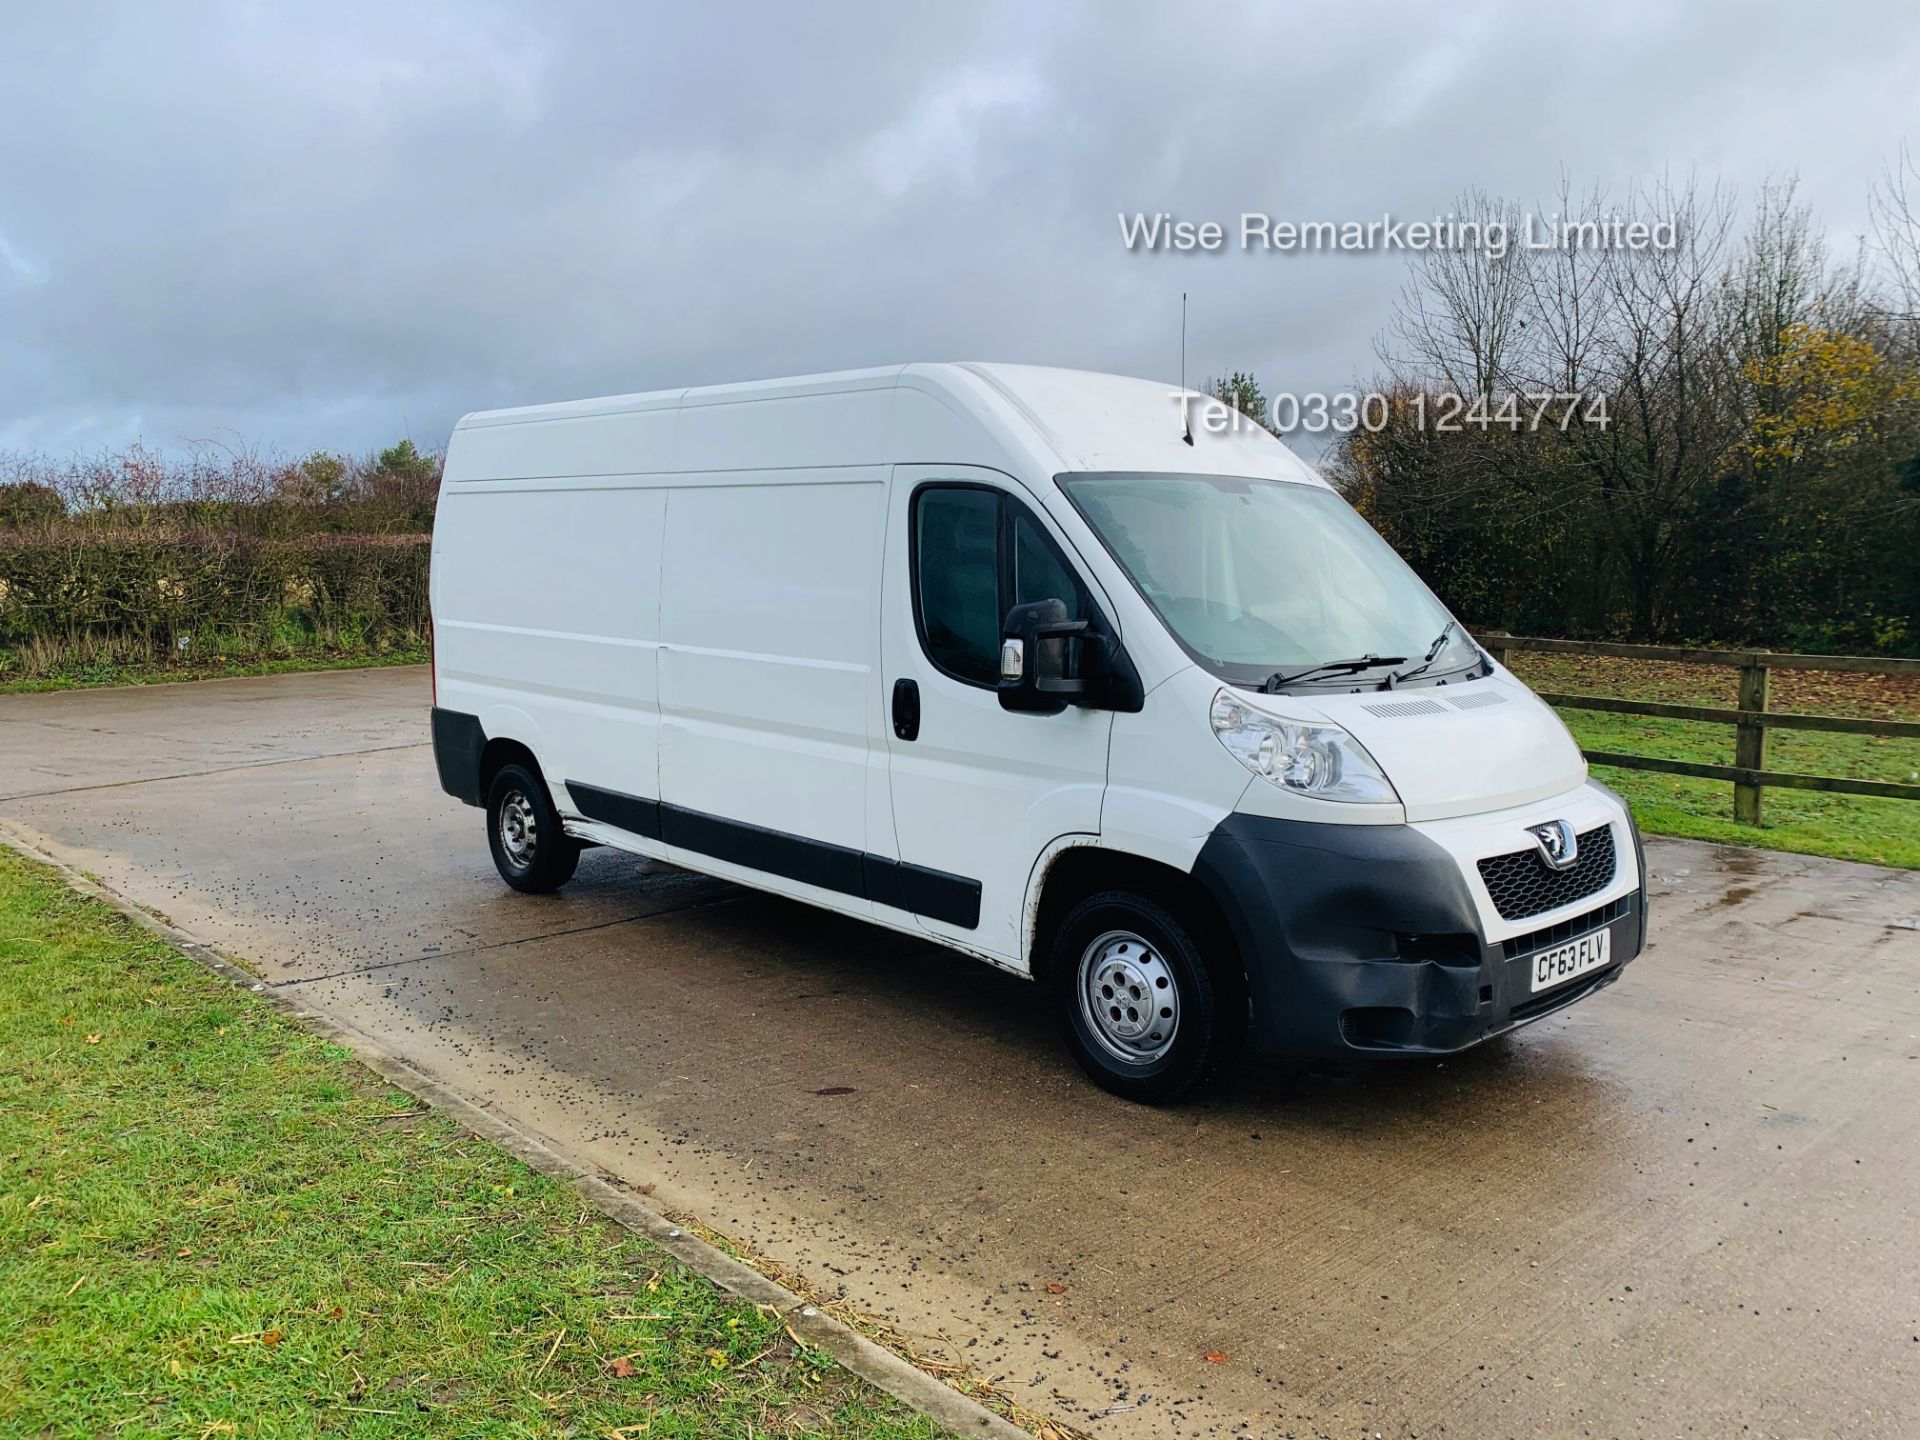 Peugeot Boxer 335 2.2 HDi (L3H2) 2014 Model - 1 Keeper From New - Long Wheel Base - Image 7 of 17